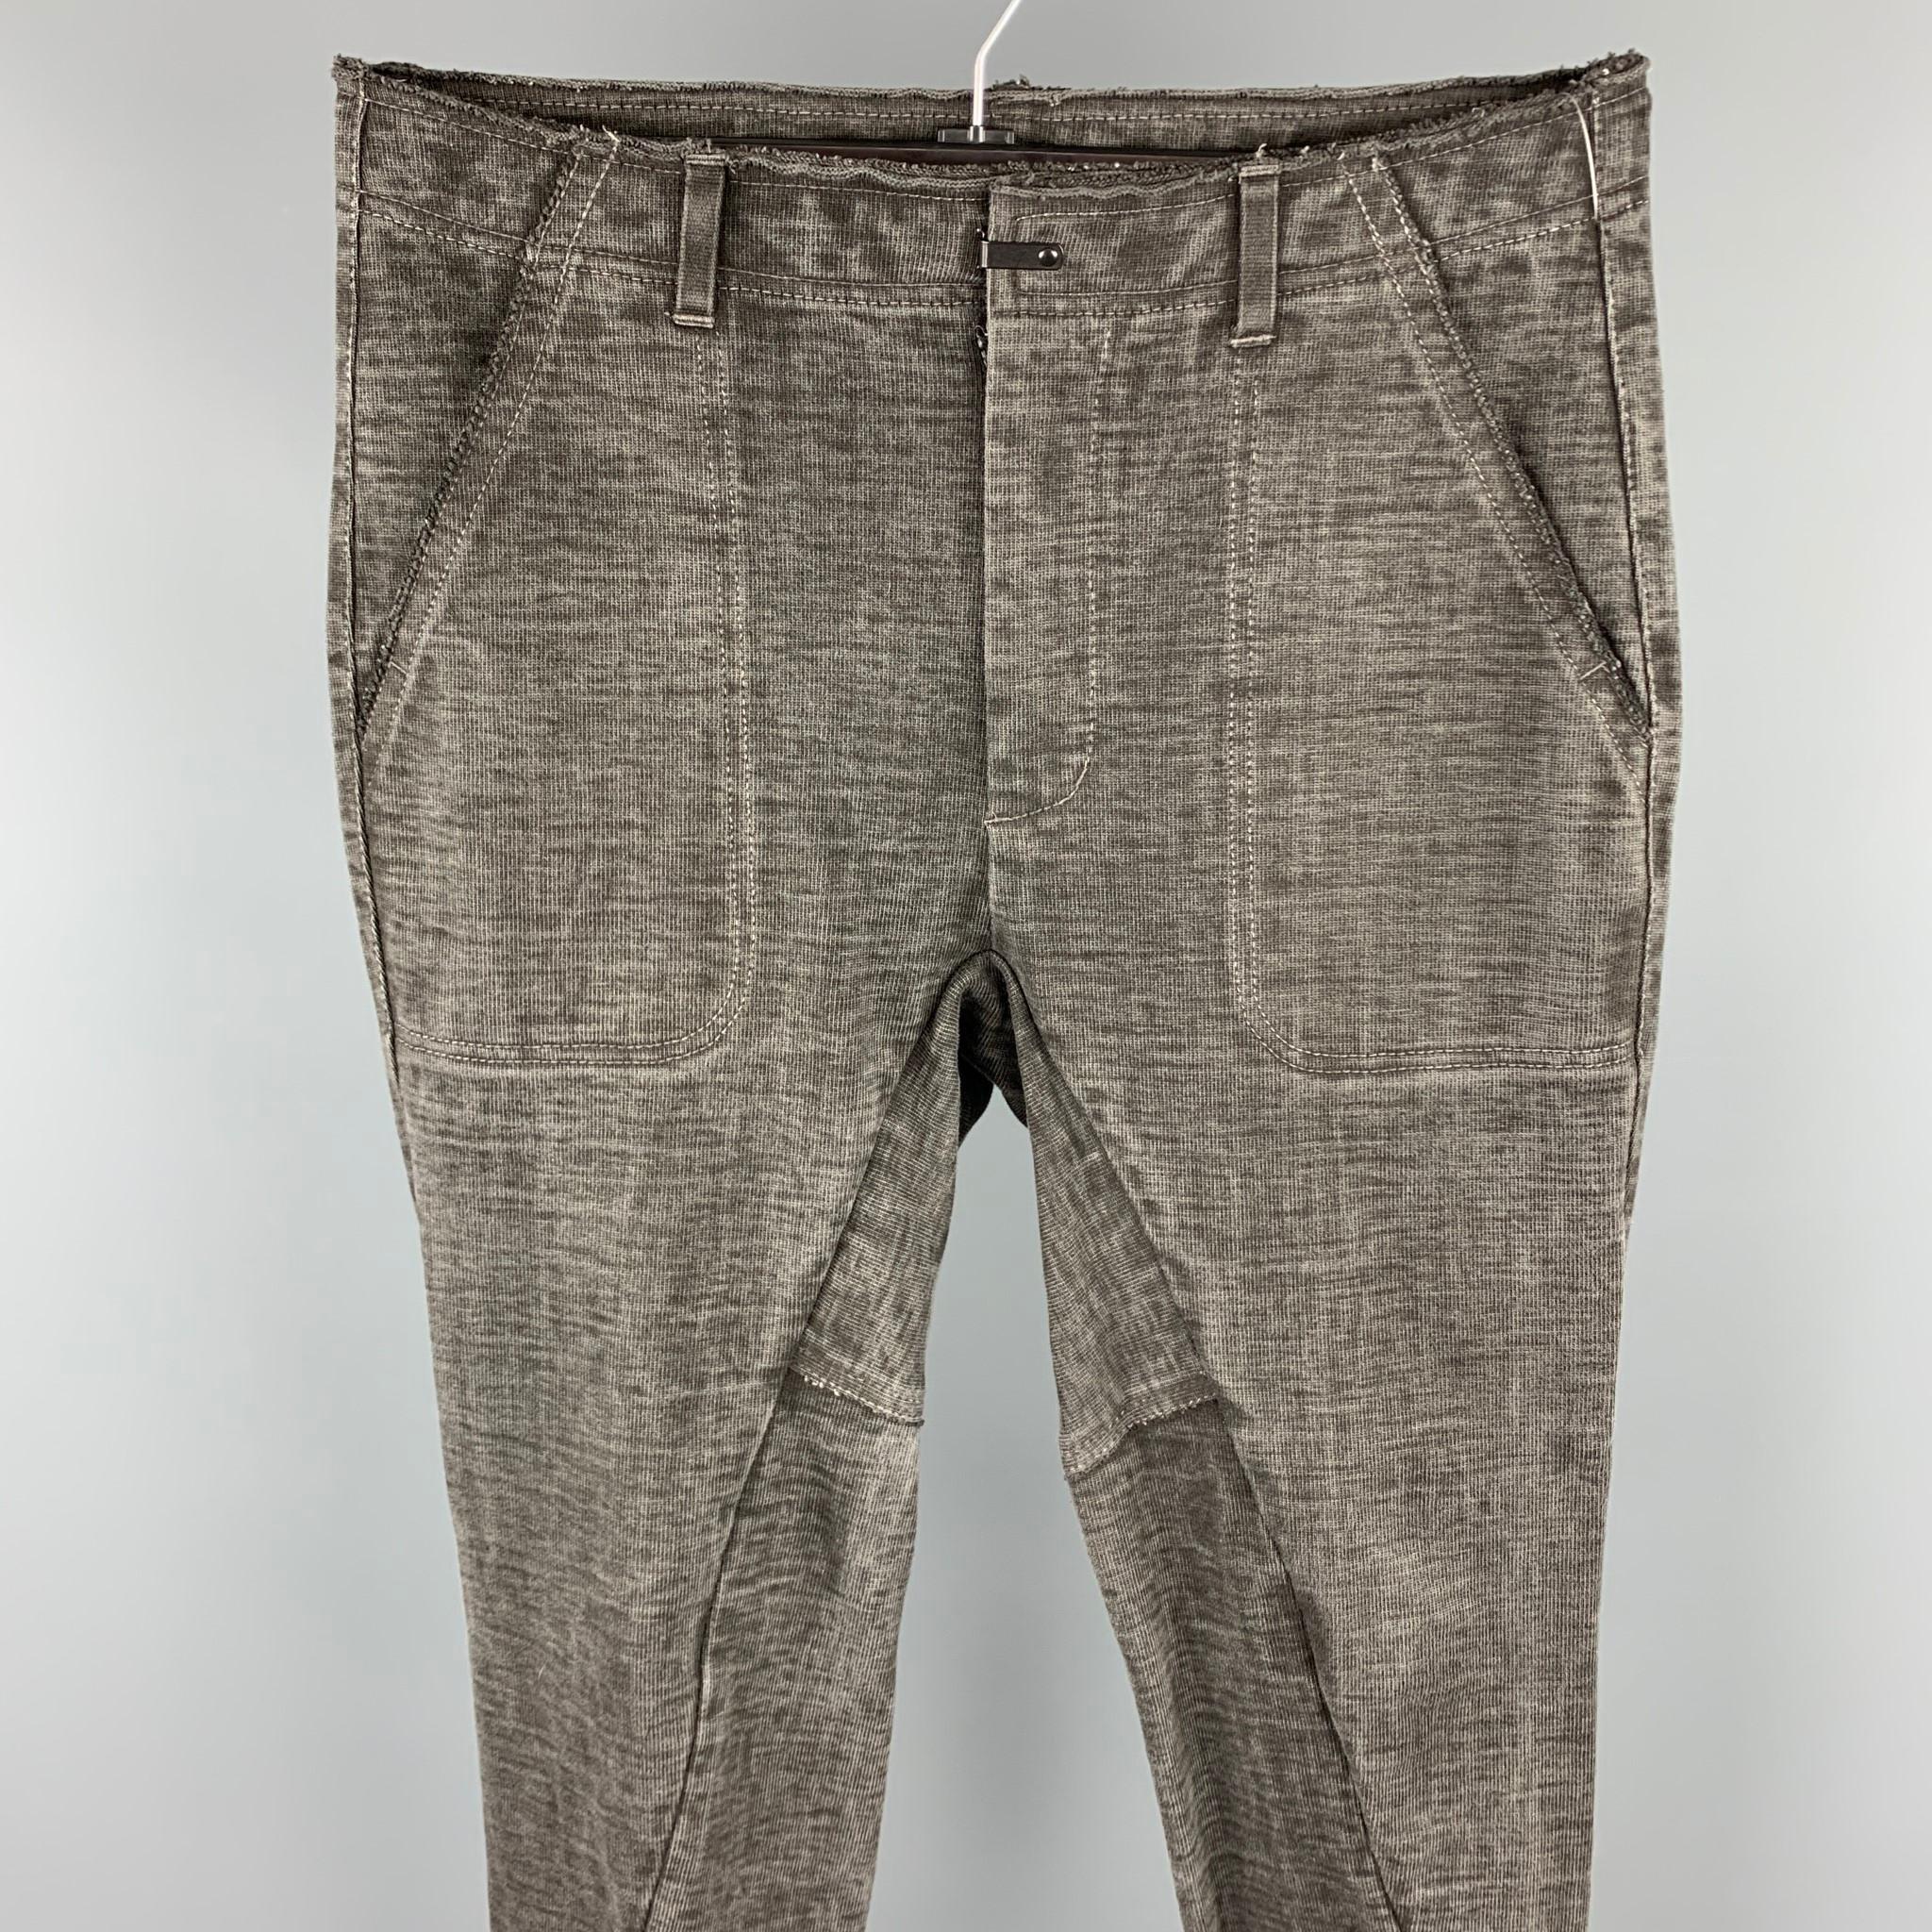 THE VIRIDI-ANNE casual pants comes in a charcoal washed cotton featuring an asymmetrical design, raw edges, contrast stitching, front tab, and a zip fly closure. Made in Japan.

Very Good Pre-Owned Condition.
Marked: JP 4

Measurements:

Waist: 34